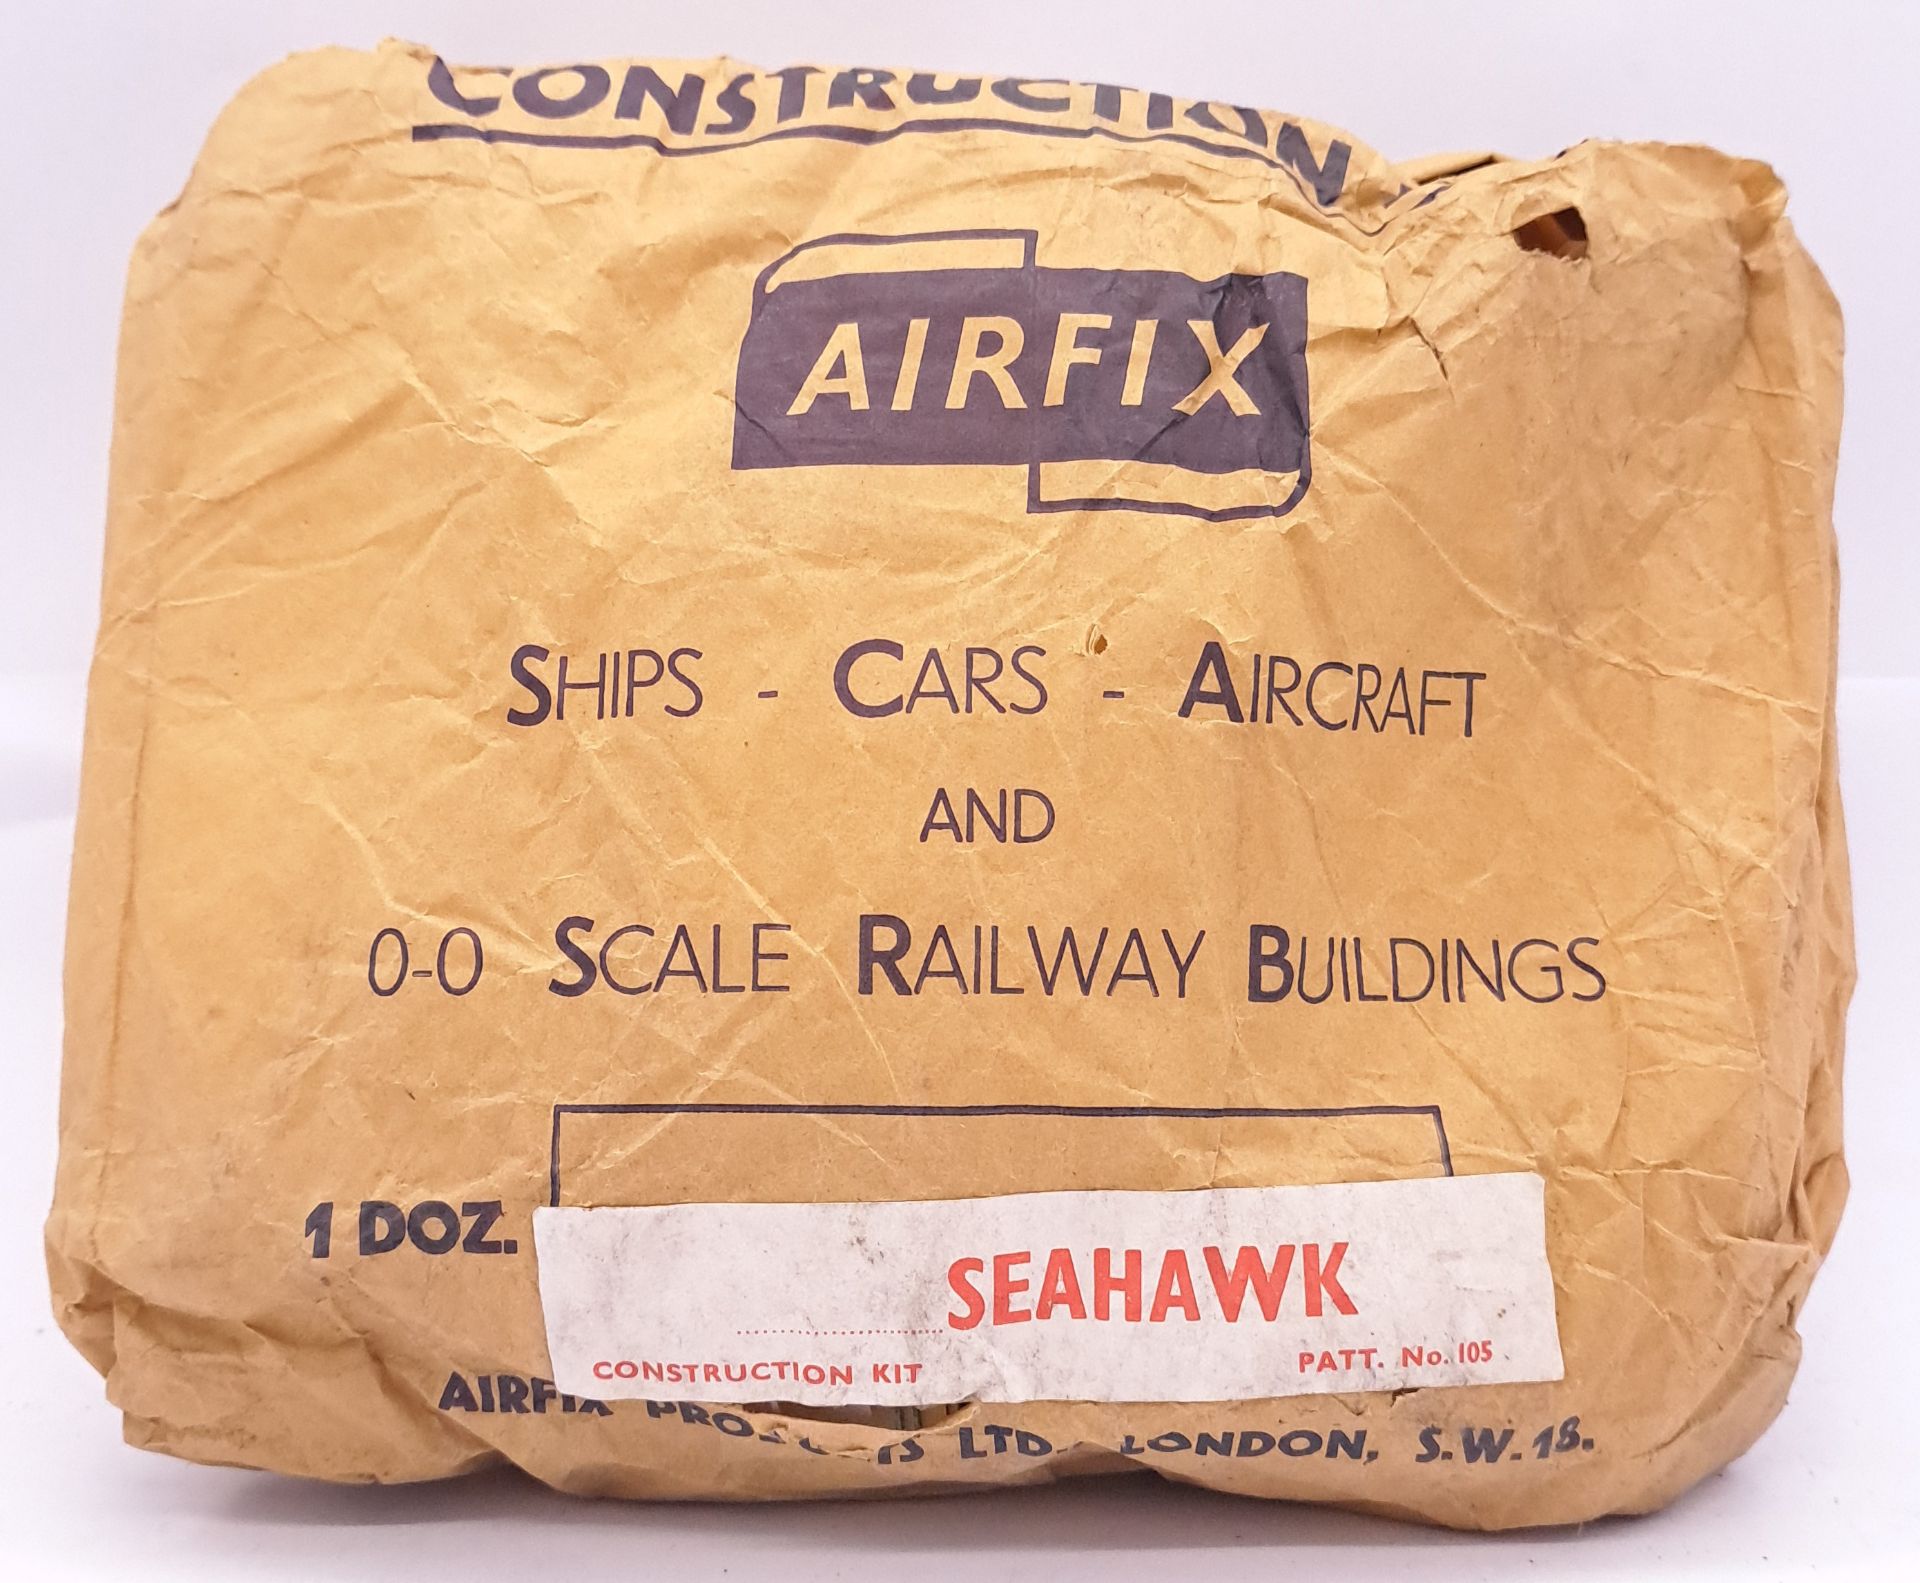 Airfix c1960’s ORIGINAL TRADE BAG complete with Bagged (possibly Type3) “Seahawk” Kits